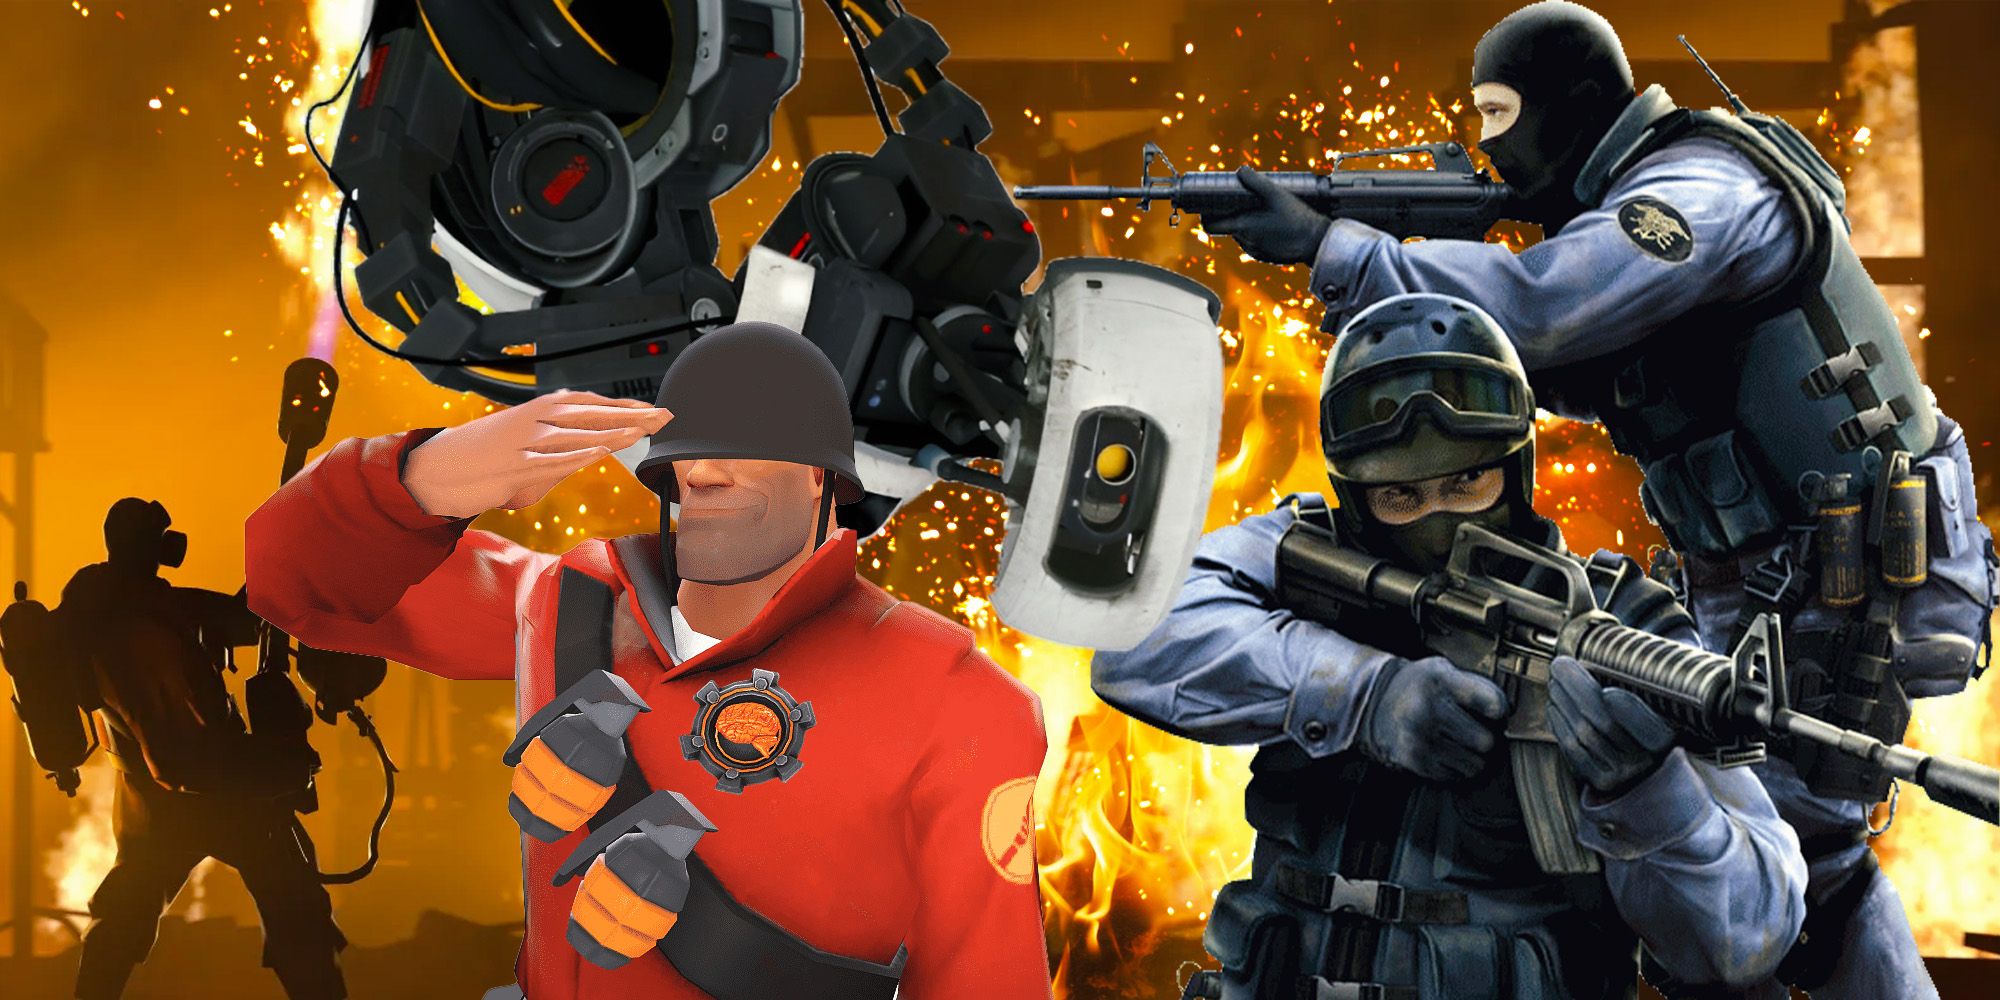 A collage of characters from Valve games. The soldier from Team Fortress 2 salutes in front of GLaDOS, who is hanging from the ceiling, and is next to a couple soldiers aiming rifles from Counter-Strike. All are in front of a background engulfed in flames by the pyro from TF2.